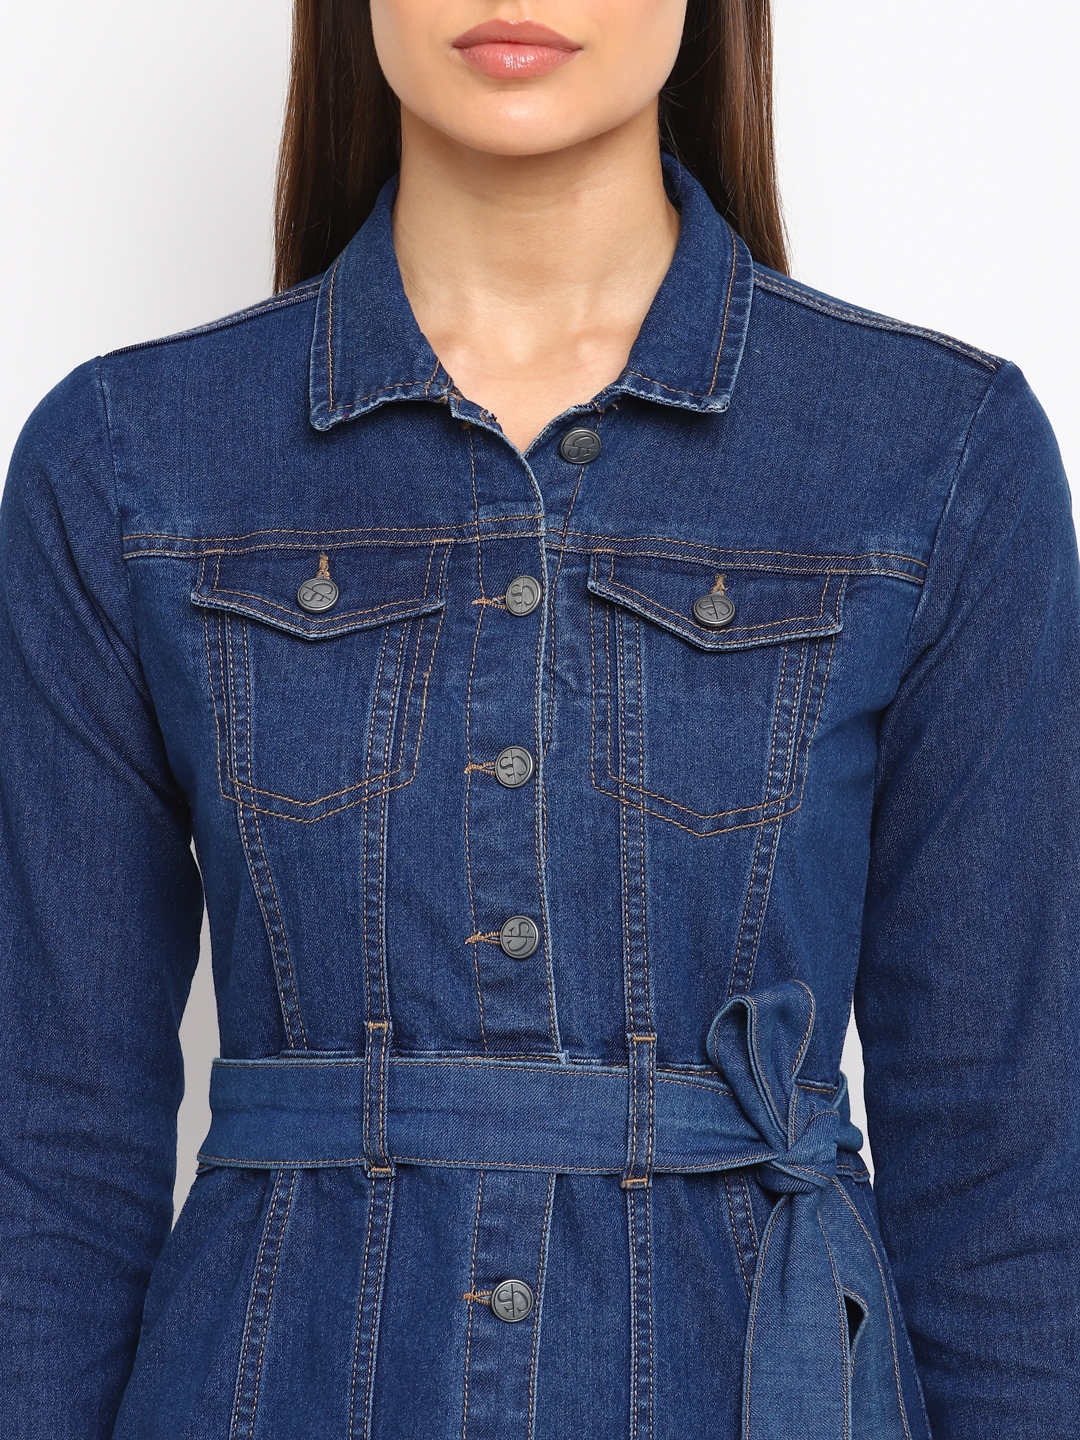 Denim Shirt Dresses for Womens Long Sleeve Loose Jean Dress Button Down  Casual Tunic Top Shift Dress (Blue,S) at Amazon Women's Clothing store